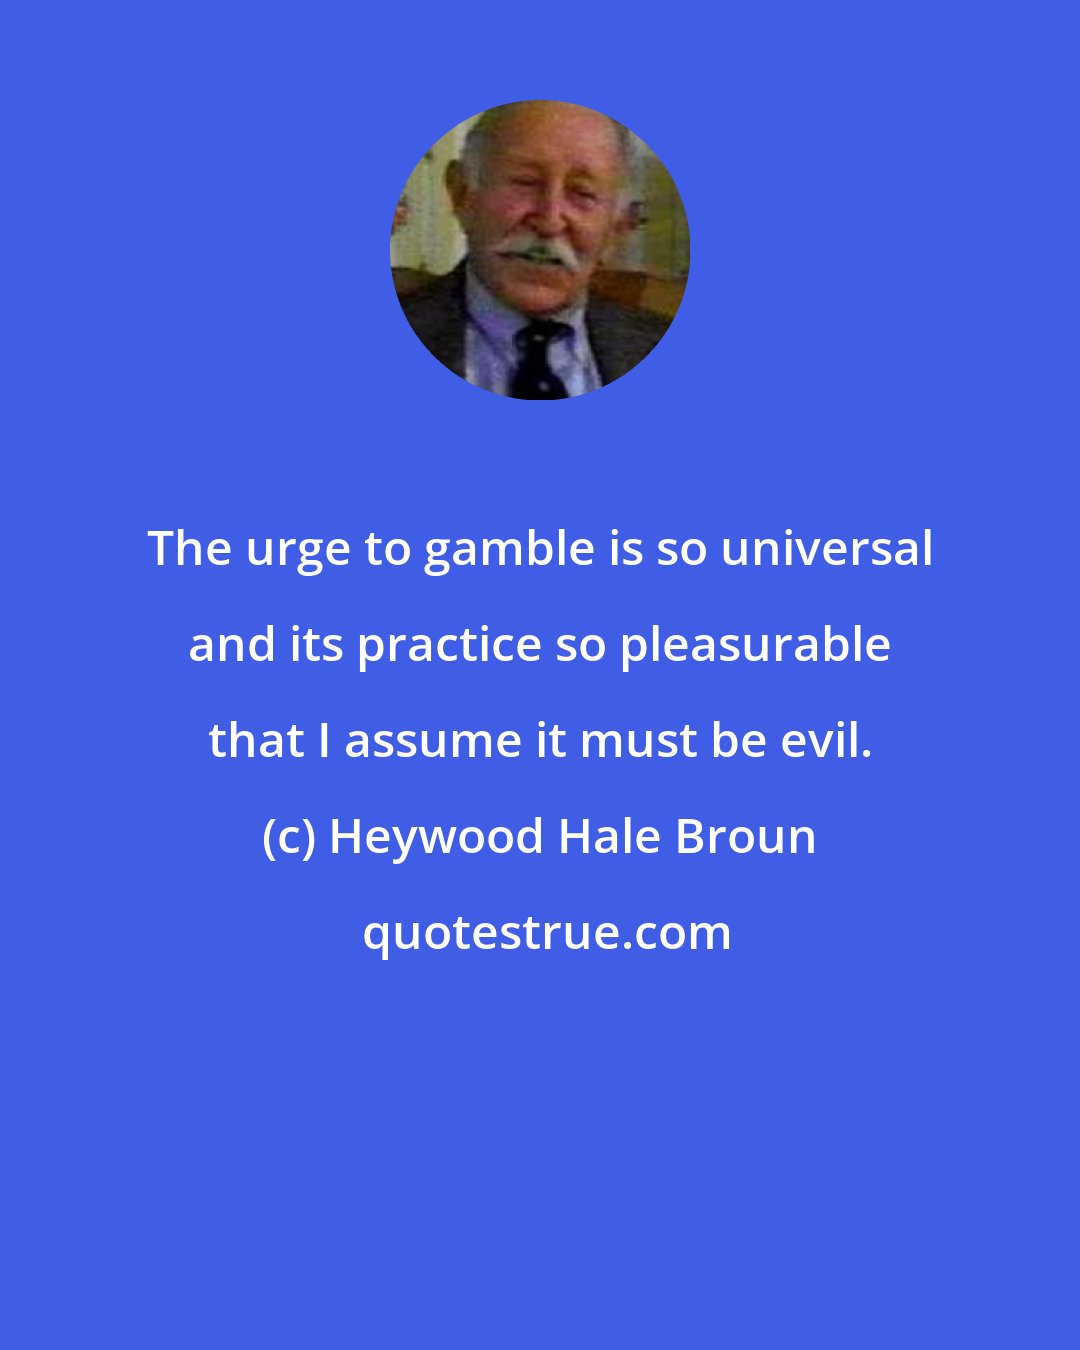 Heywood Hale Broun: The urge to gamble is so universal and its practice so pleasurable that I assume it must be evil.